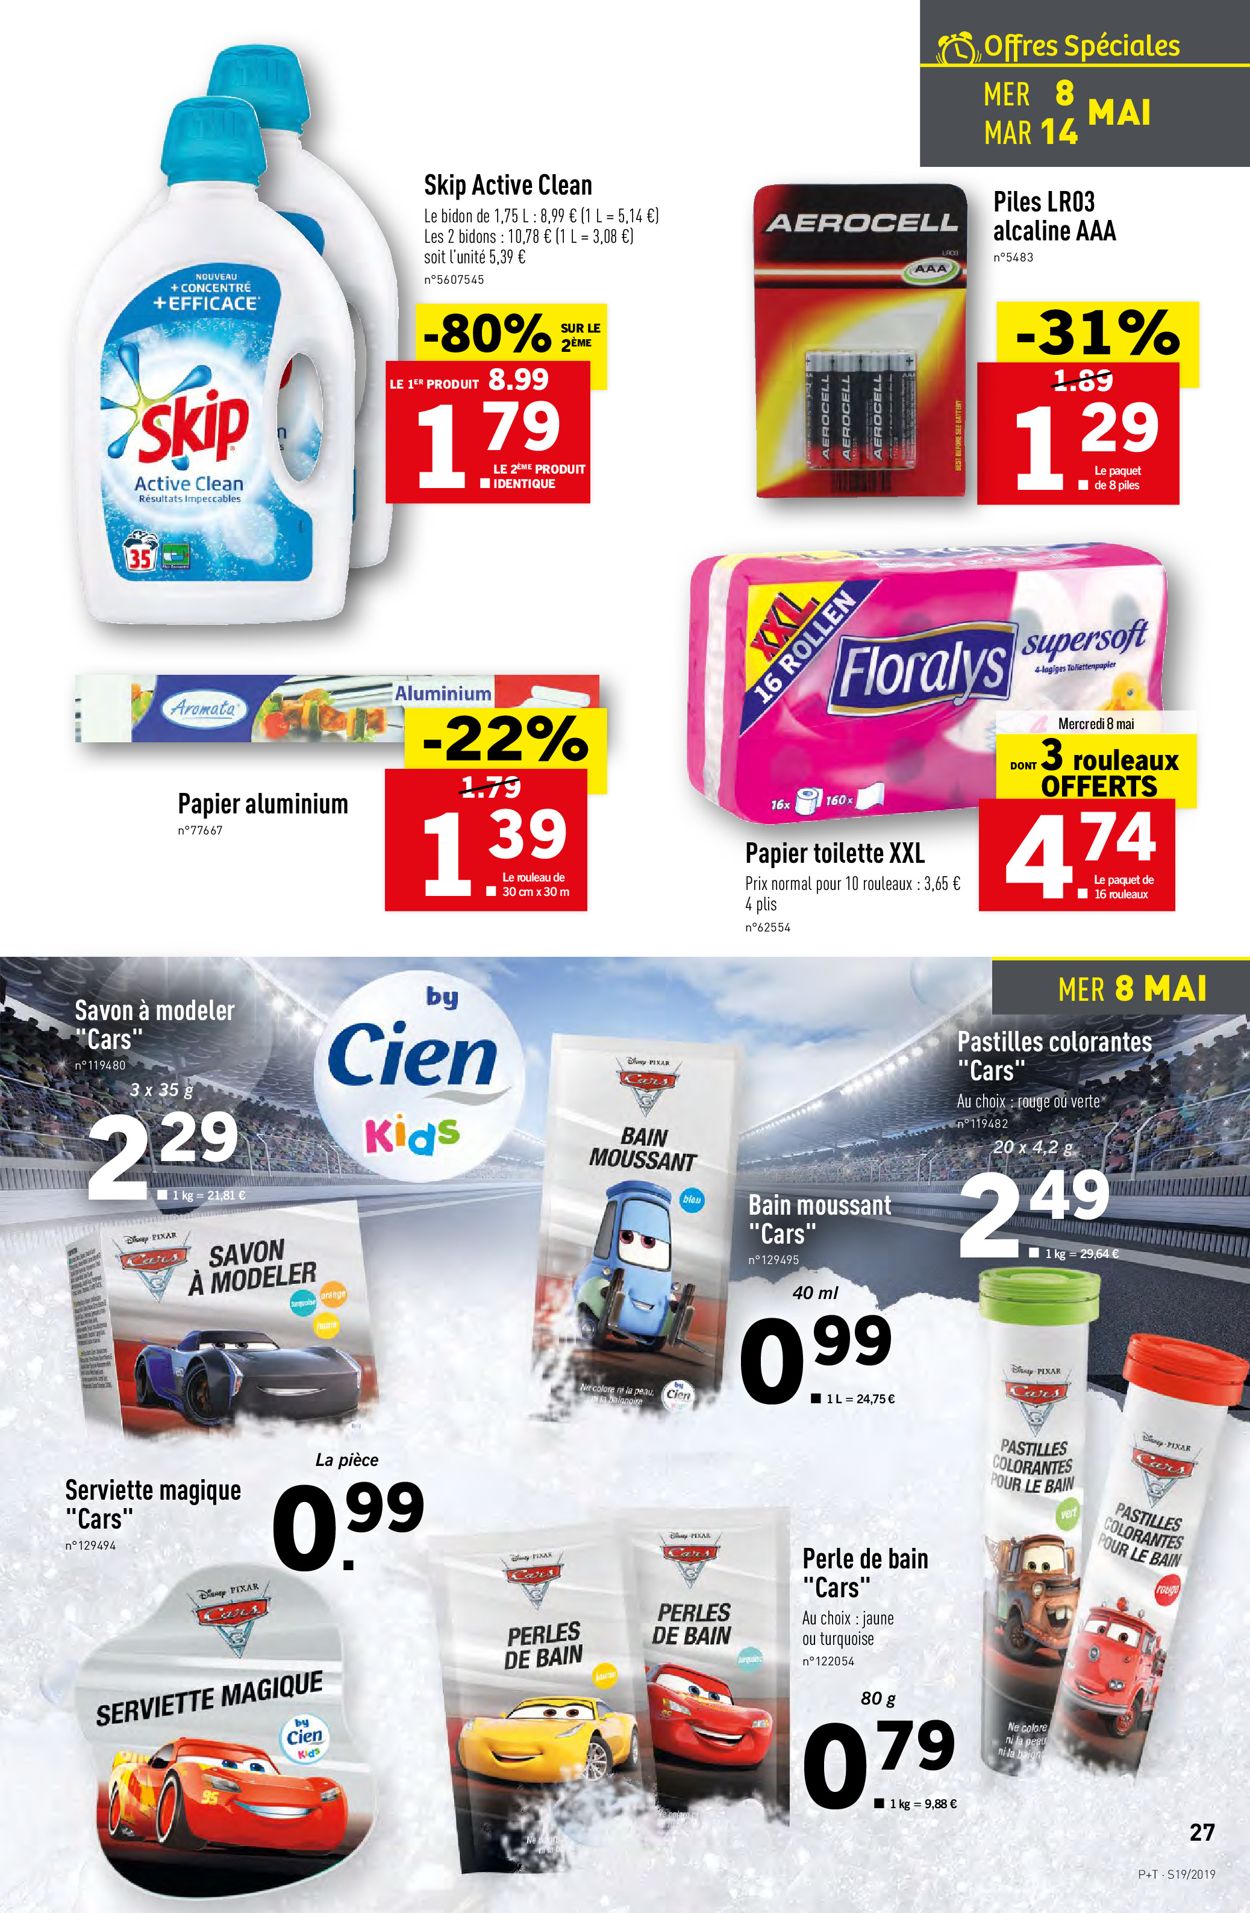 Lidl Catalogue - 08.05-14.05.2019 (Page 27)